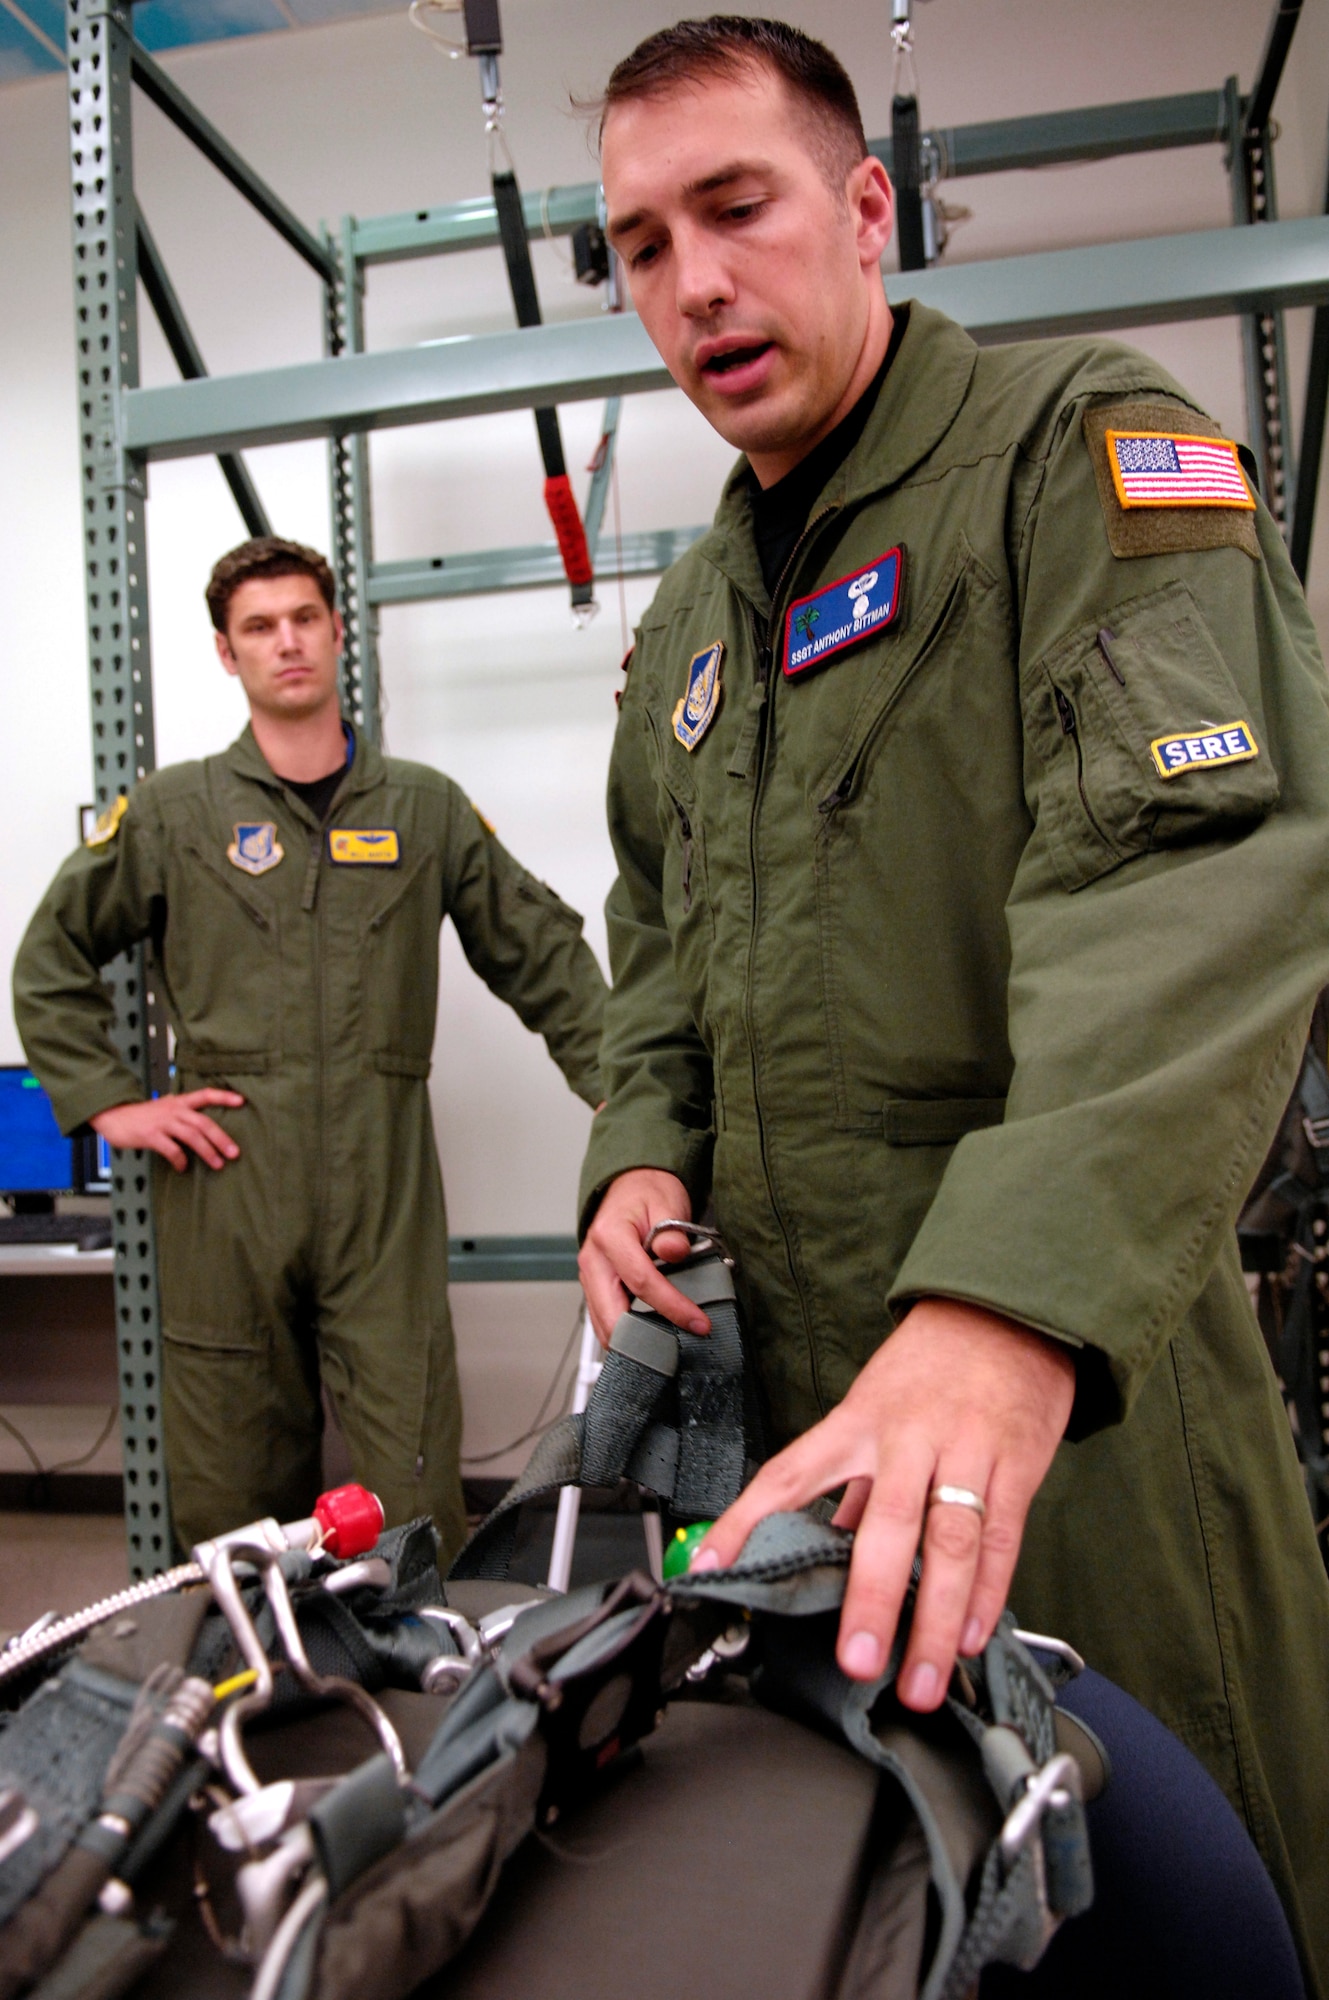 Maj. Will Martin (left), a pilot with the 535th Airlift Squadron at Hickam Air Force Base, Hawaii, listens as Staff Sgt. Anthony Bittman provides guidance for using the parachute simulator during a refresher parachute training class Jan 24.   Aircrews require annual non-ejection parachute training so they are current according to Air Force instructions. Sergeant Bittman is a survival, evasion, resistance, escape, or SERE, instructor with the 15th Airlift Wing at Hickam.  (U.S. Air Force photo/Tech. Sgt. Cohen A. Young)